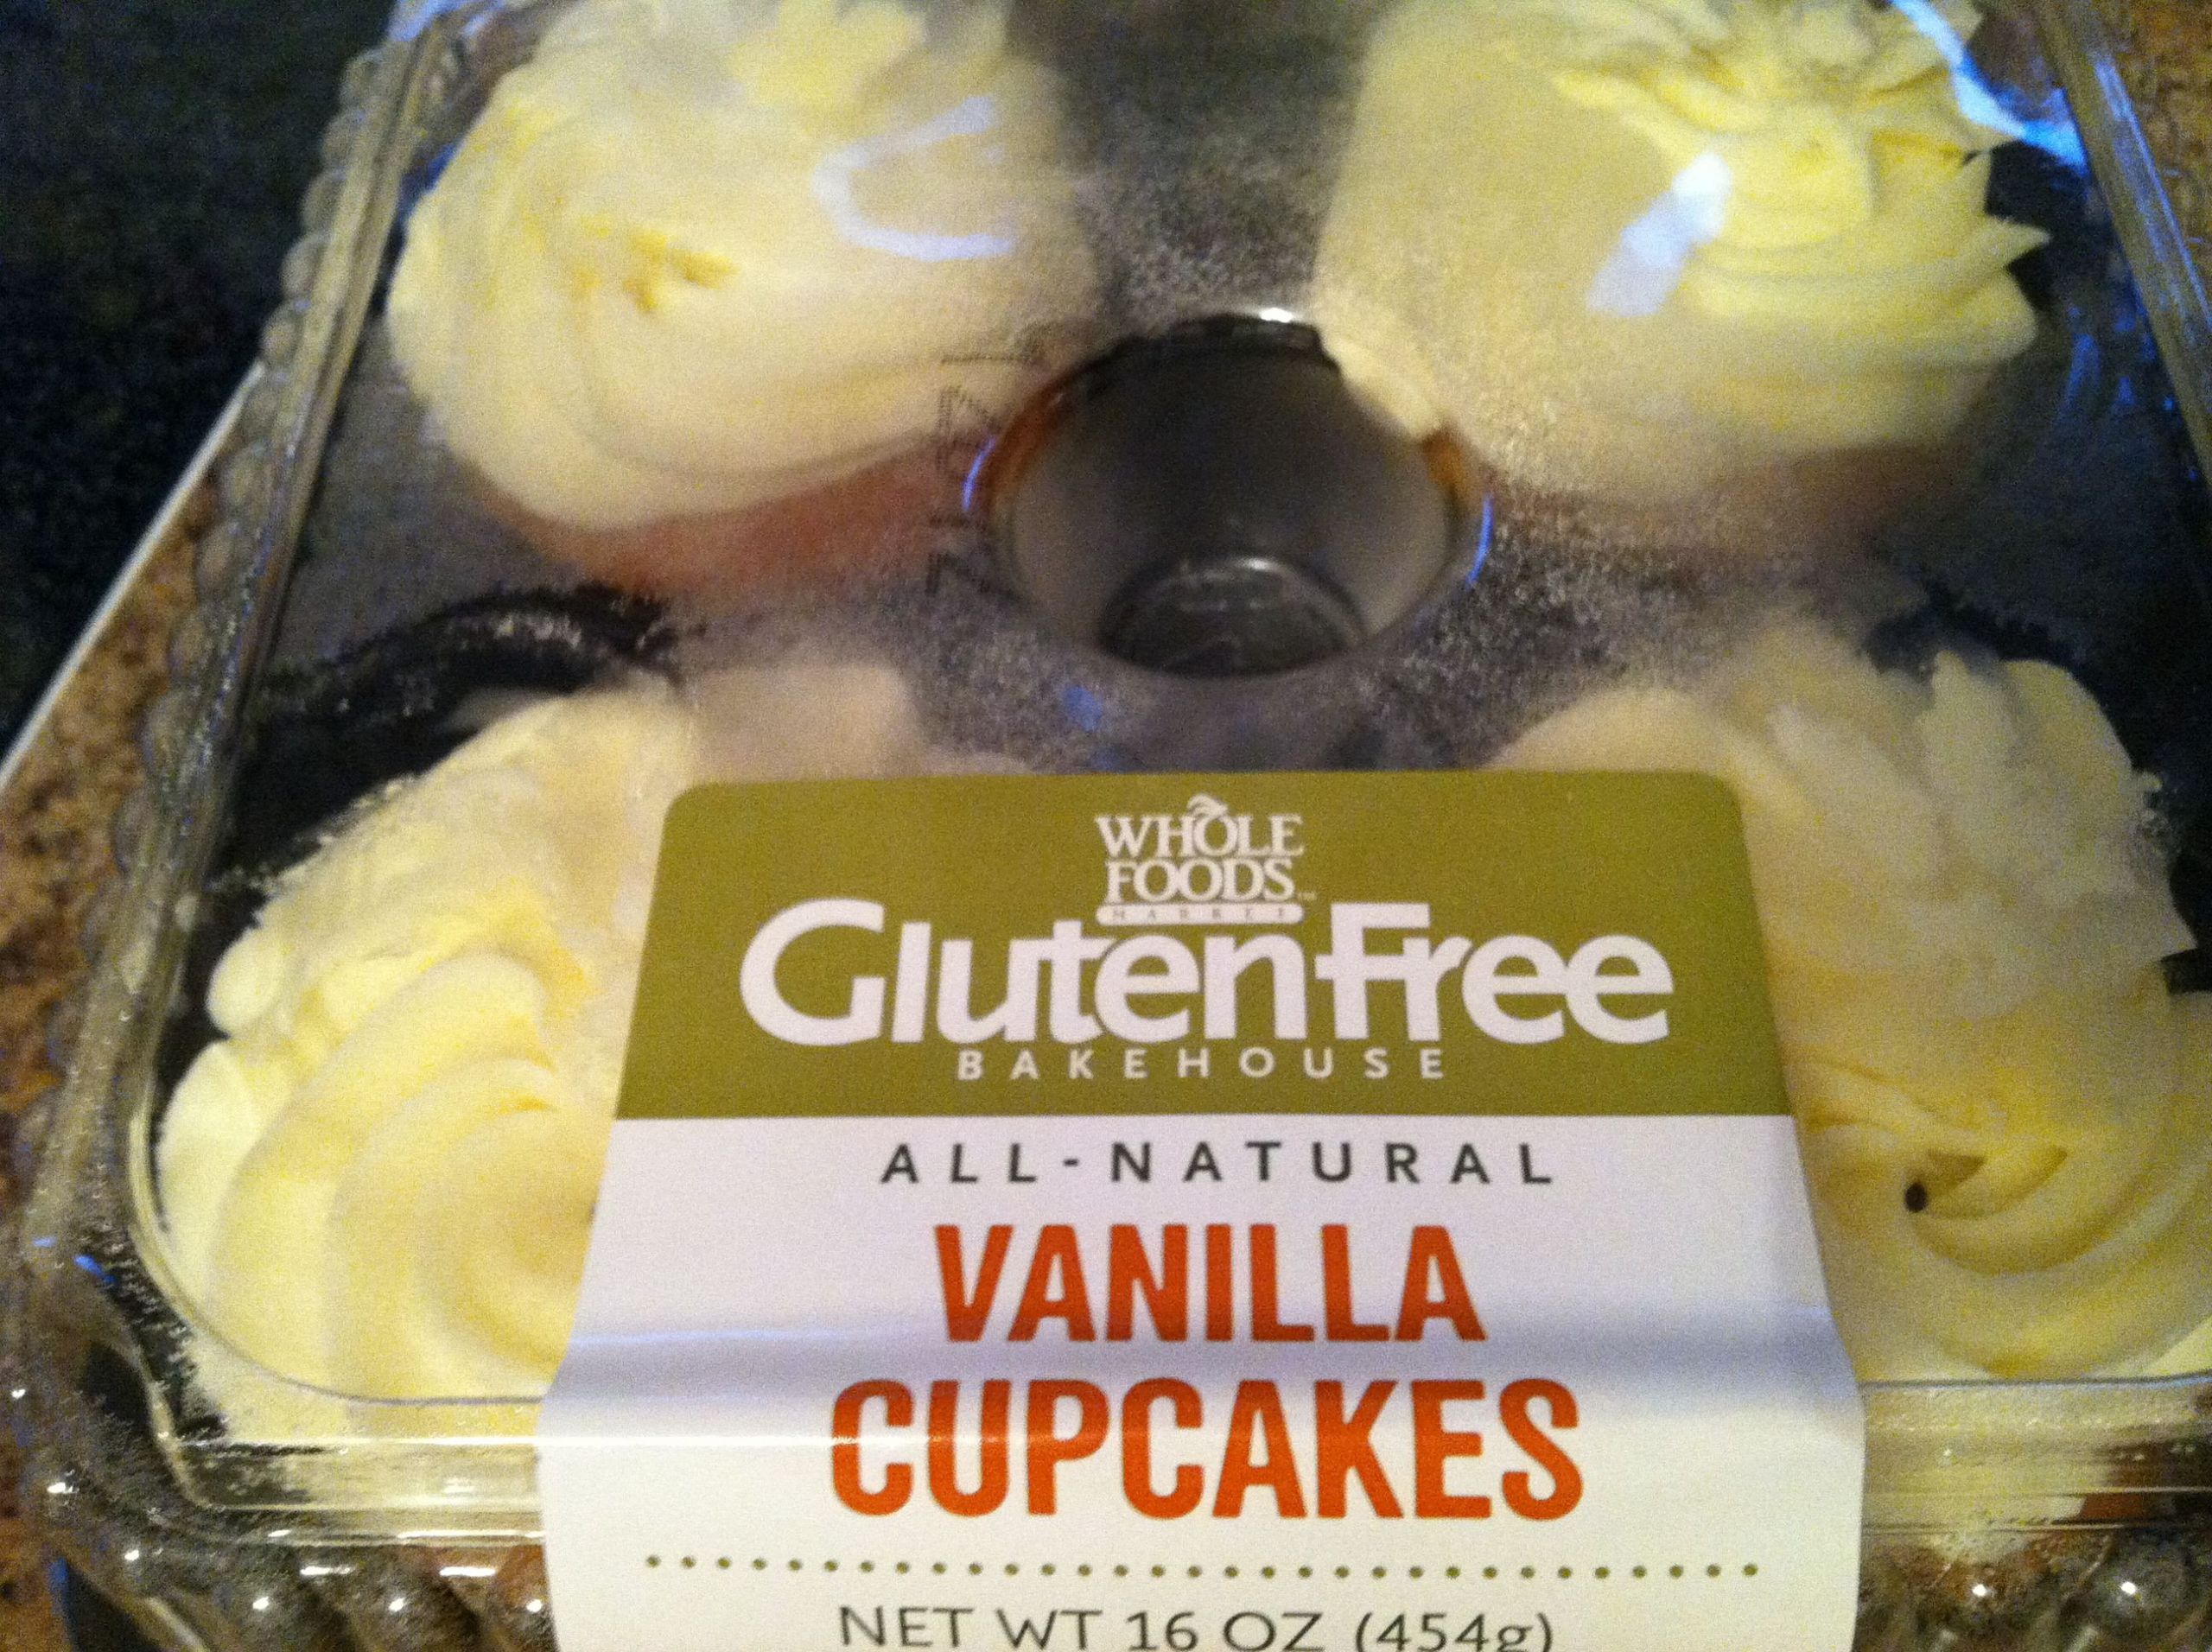 Whole Foods Gluten Free Desserts
 Whole Foods Gluten Free Cupcakes